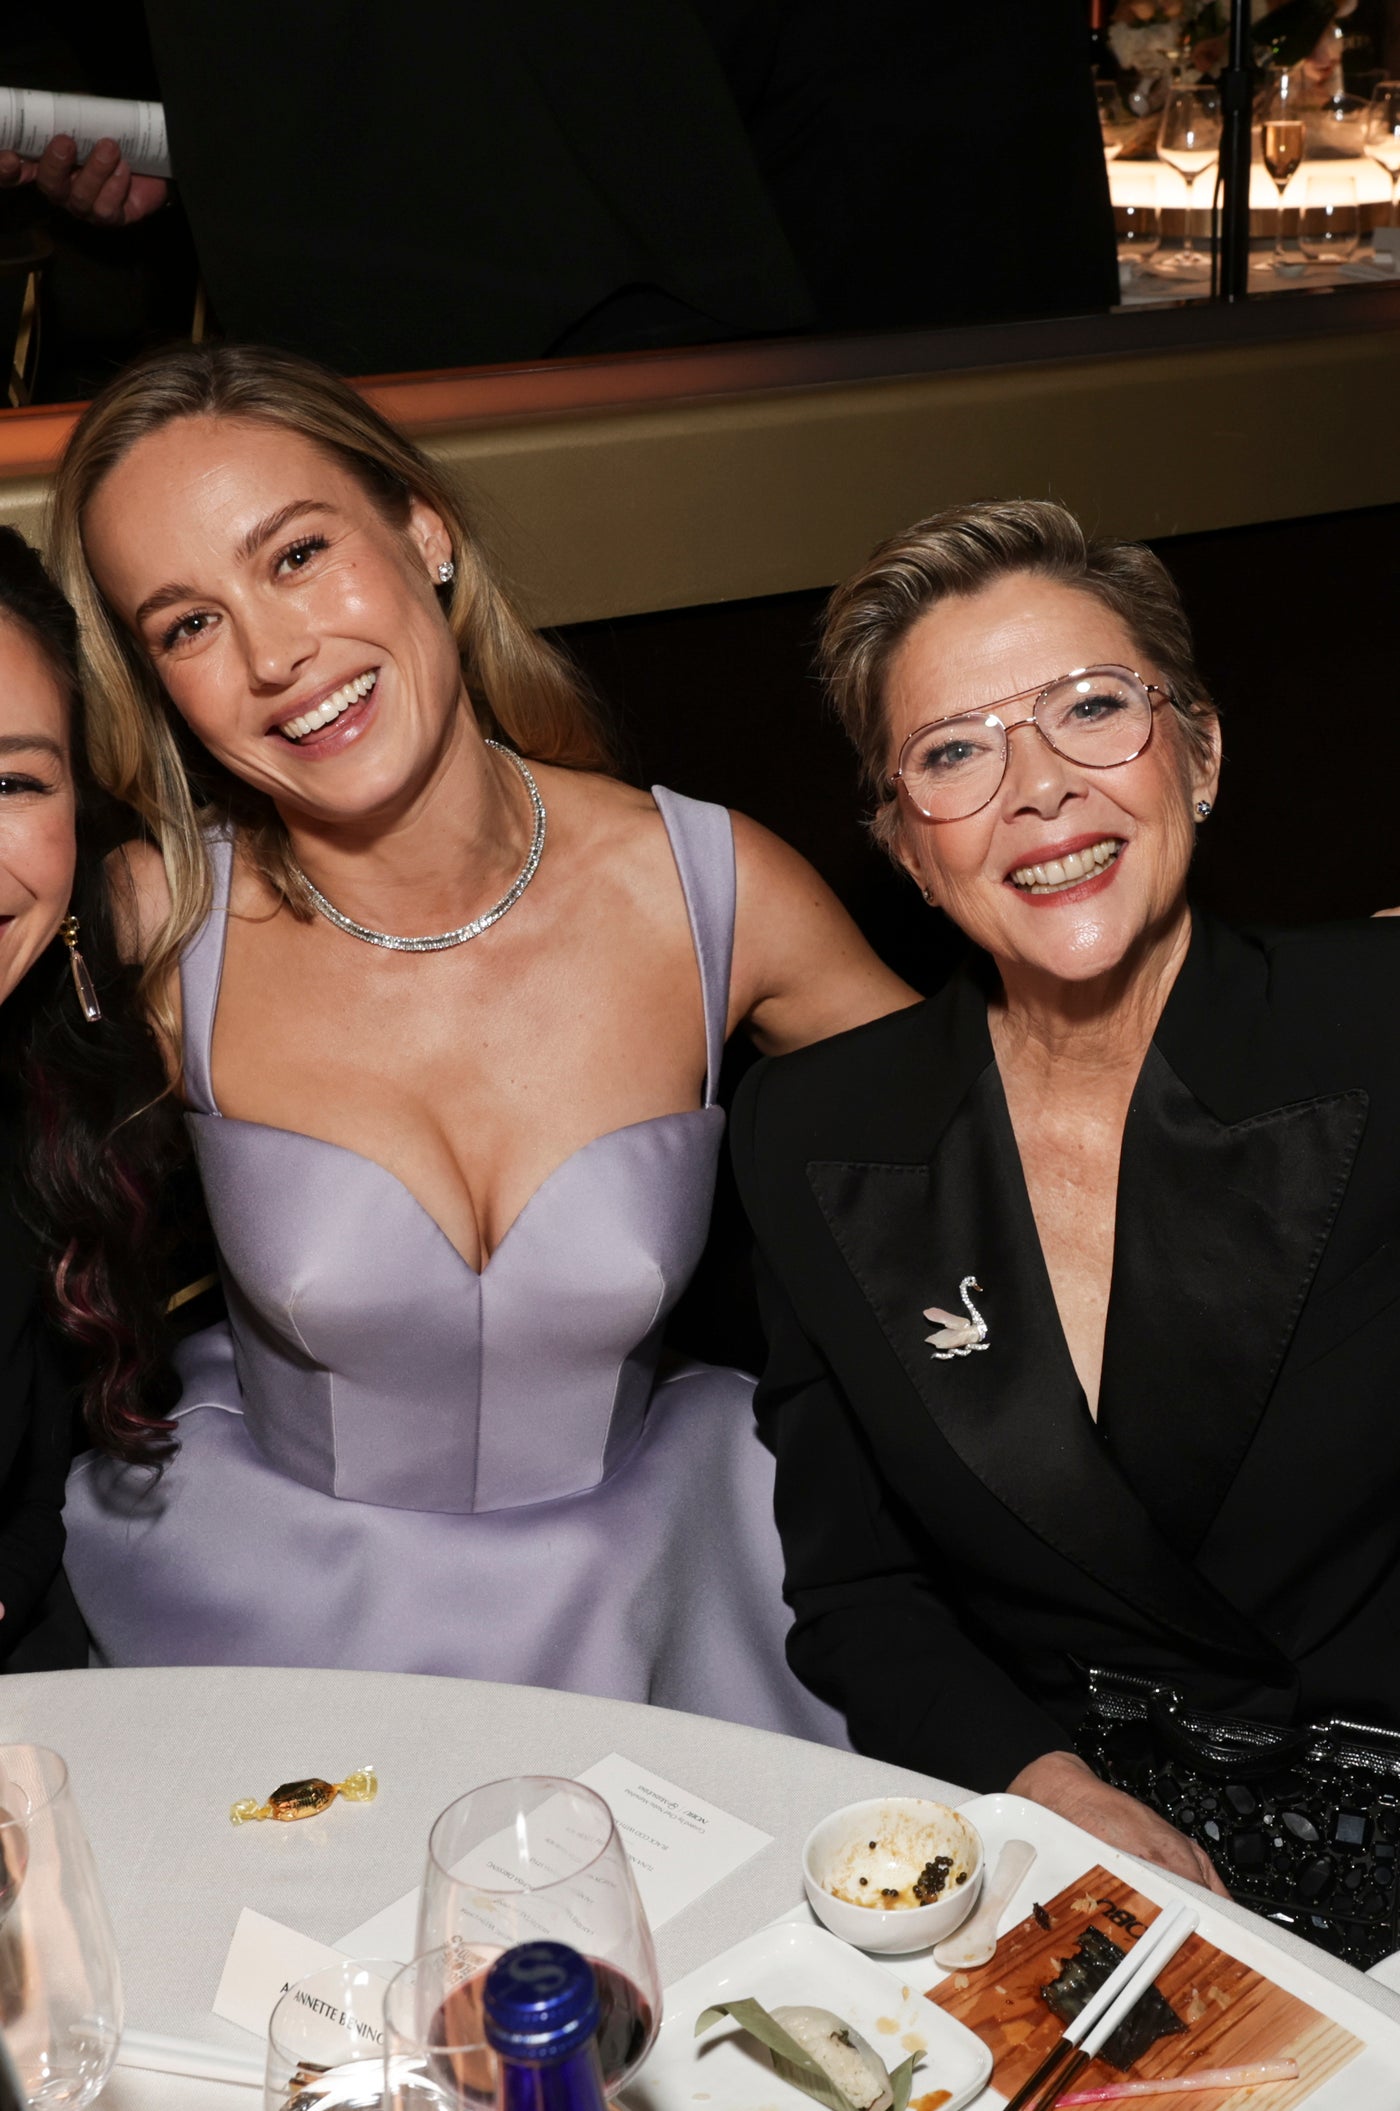 Brie Larson and Annette Bening